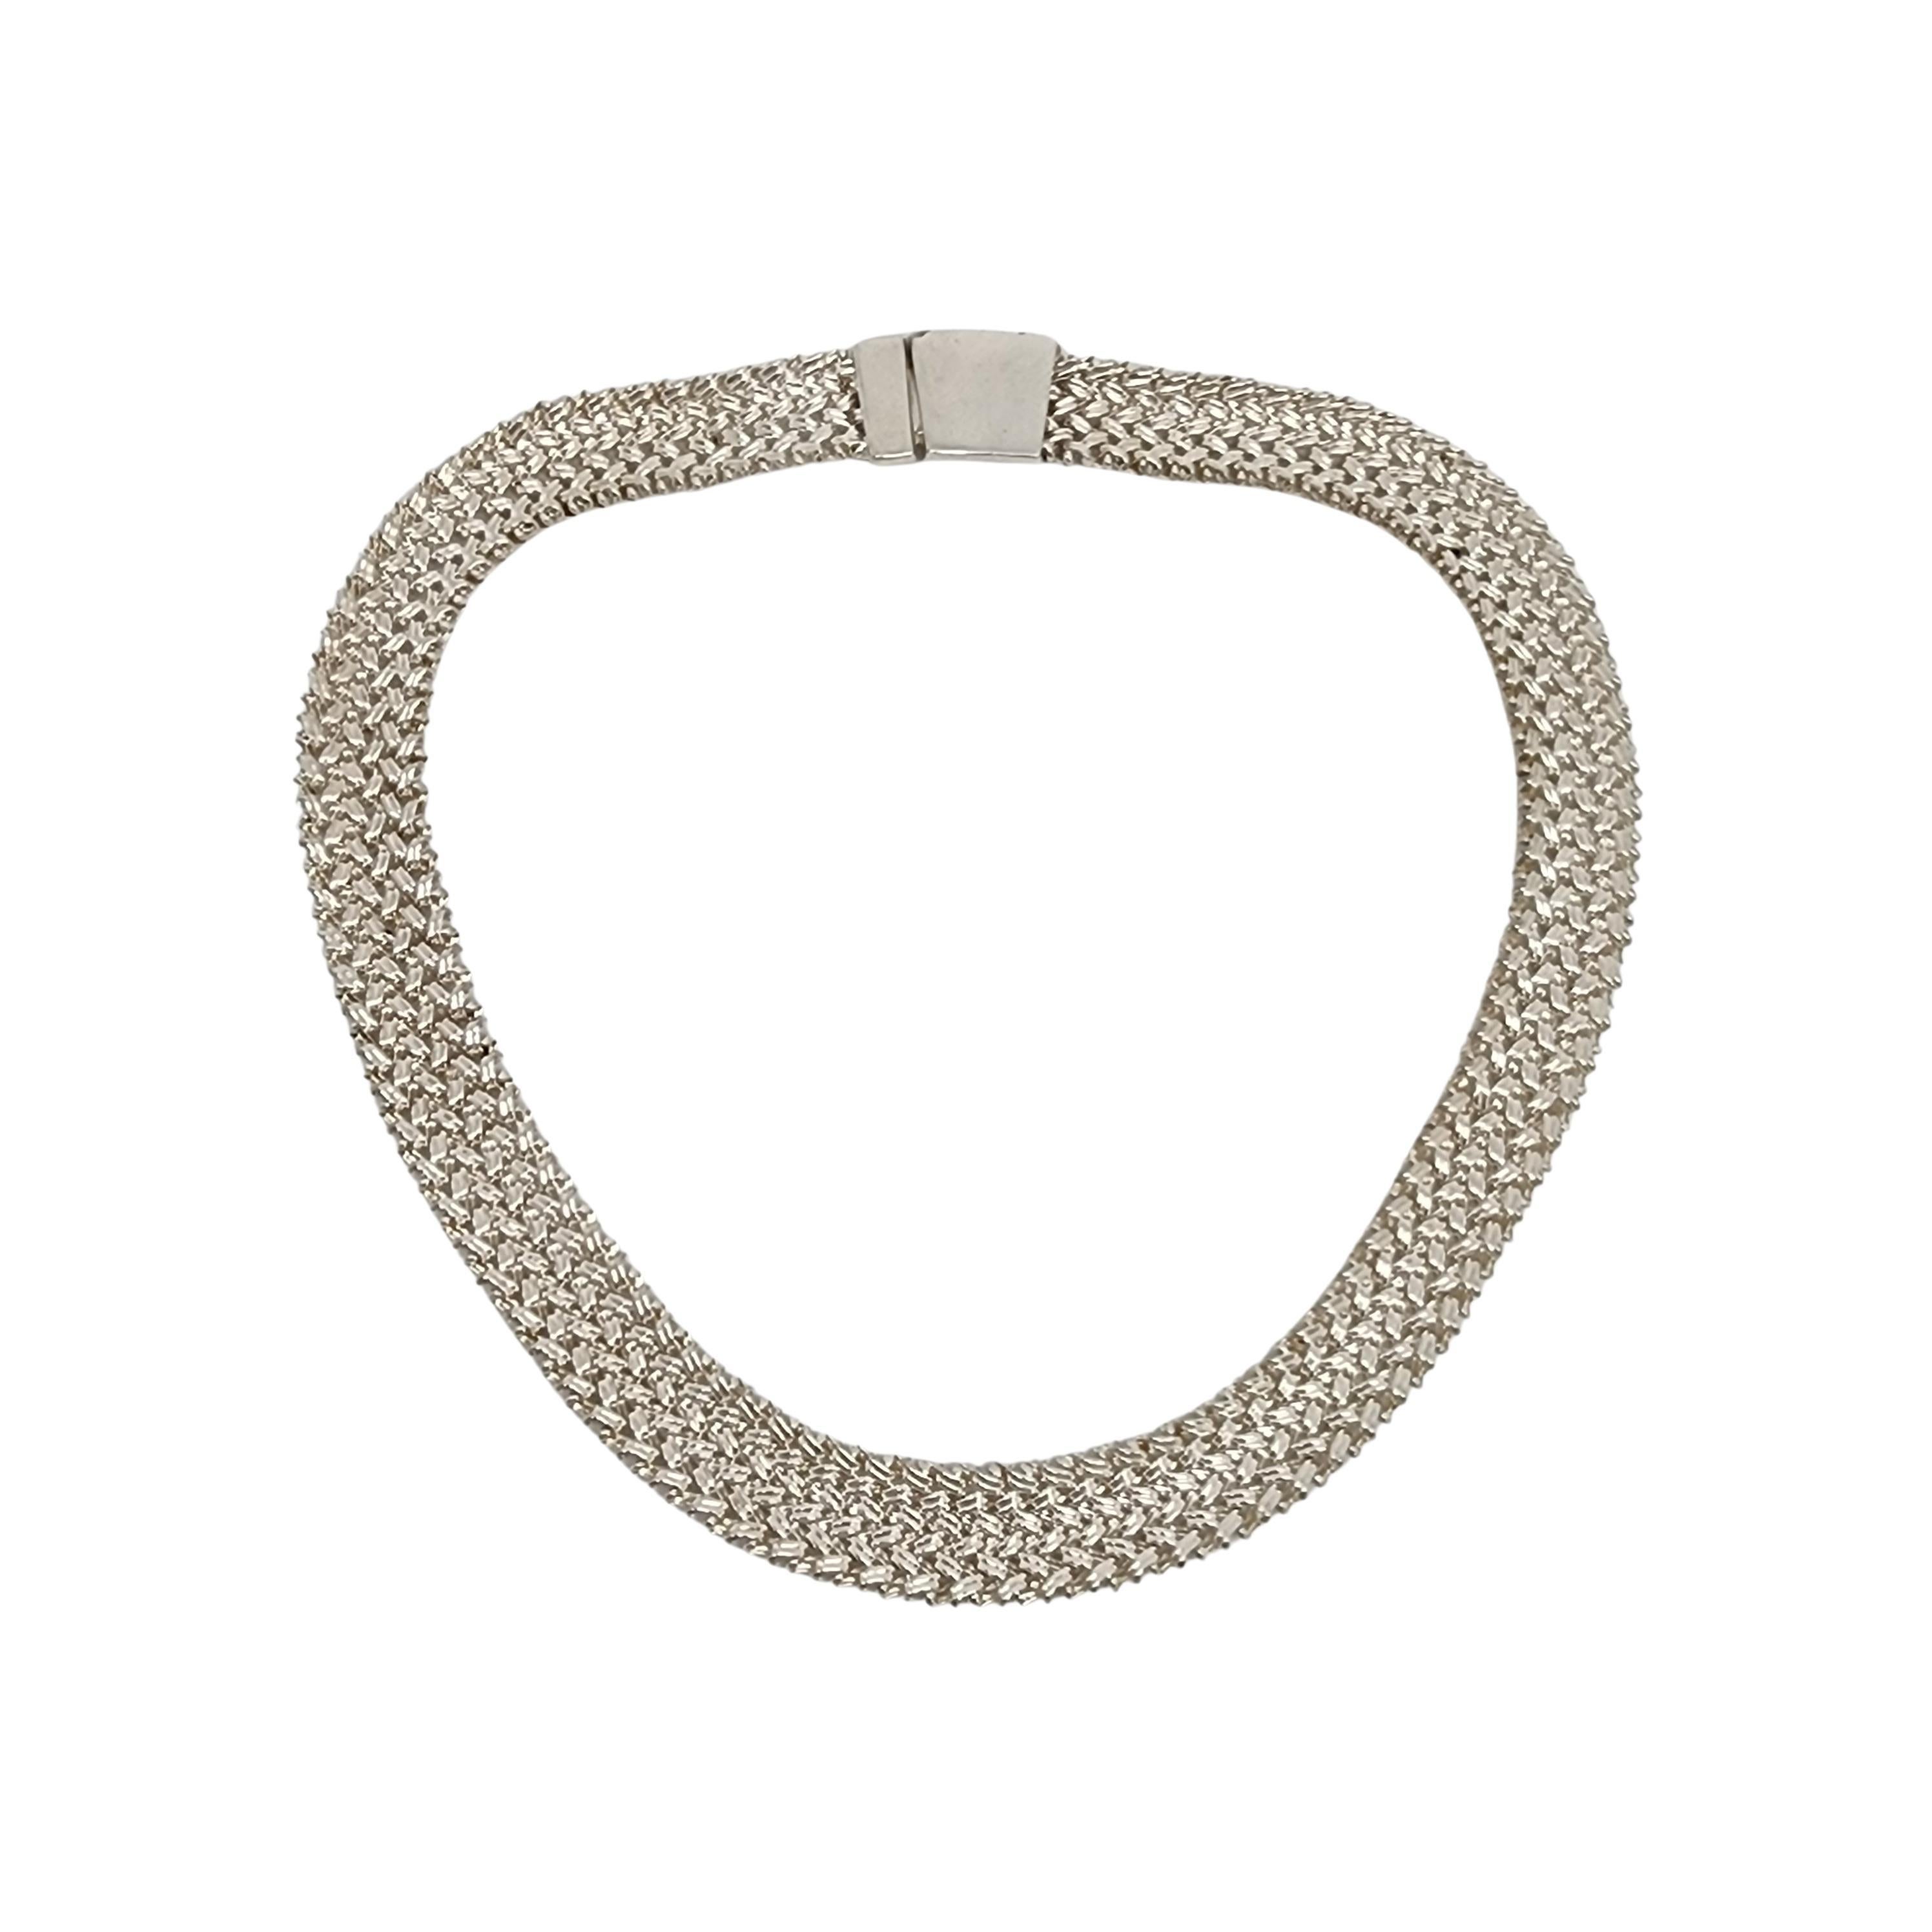 Birks sterling silver wide flat woven chain necklace

This chain substantial necklace features a wide woven design with push button clasp closure.

Weighs approx 70.9g, 45.6dwt

Measures approx 17 1/2